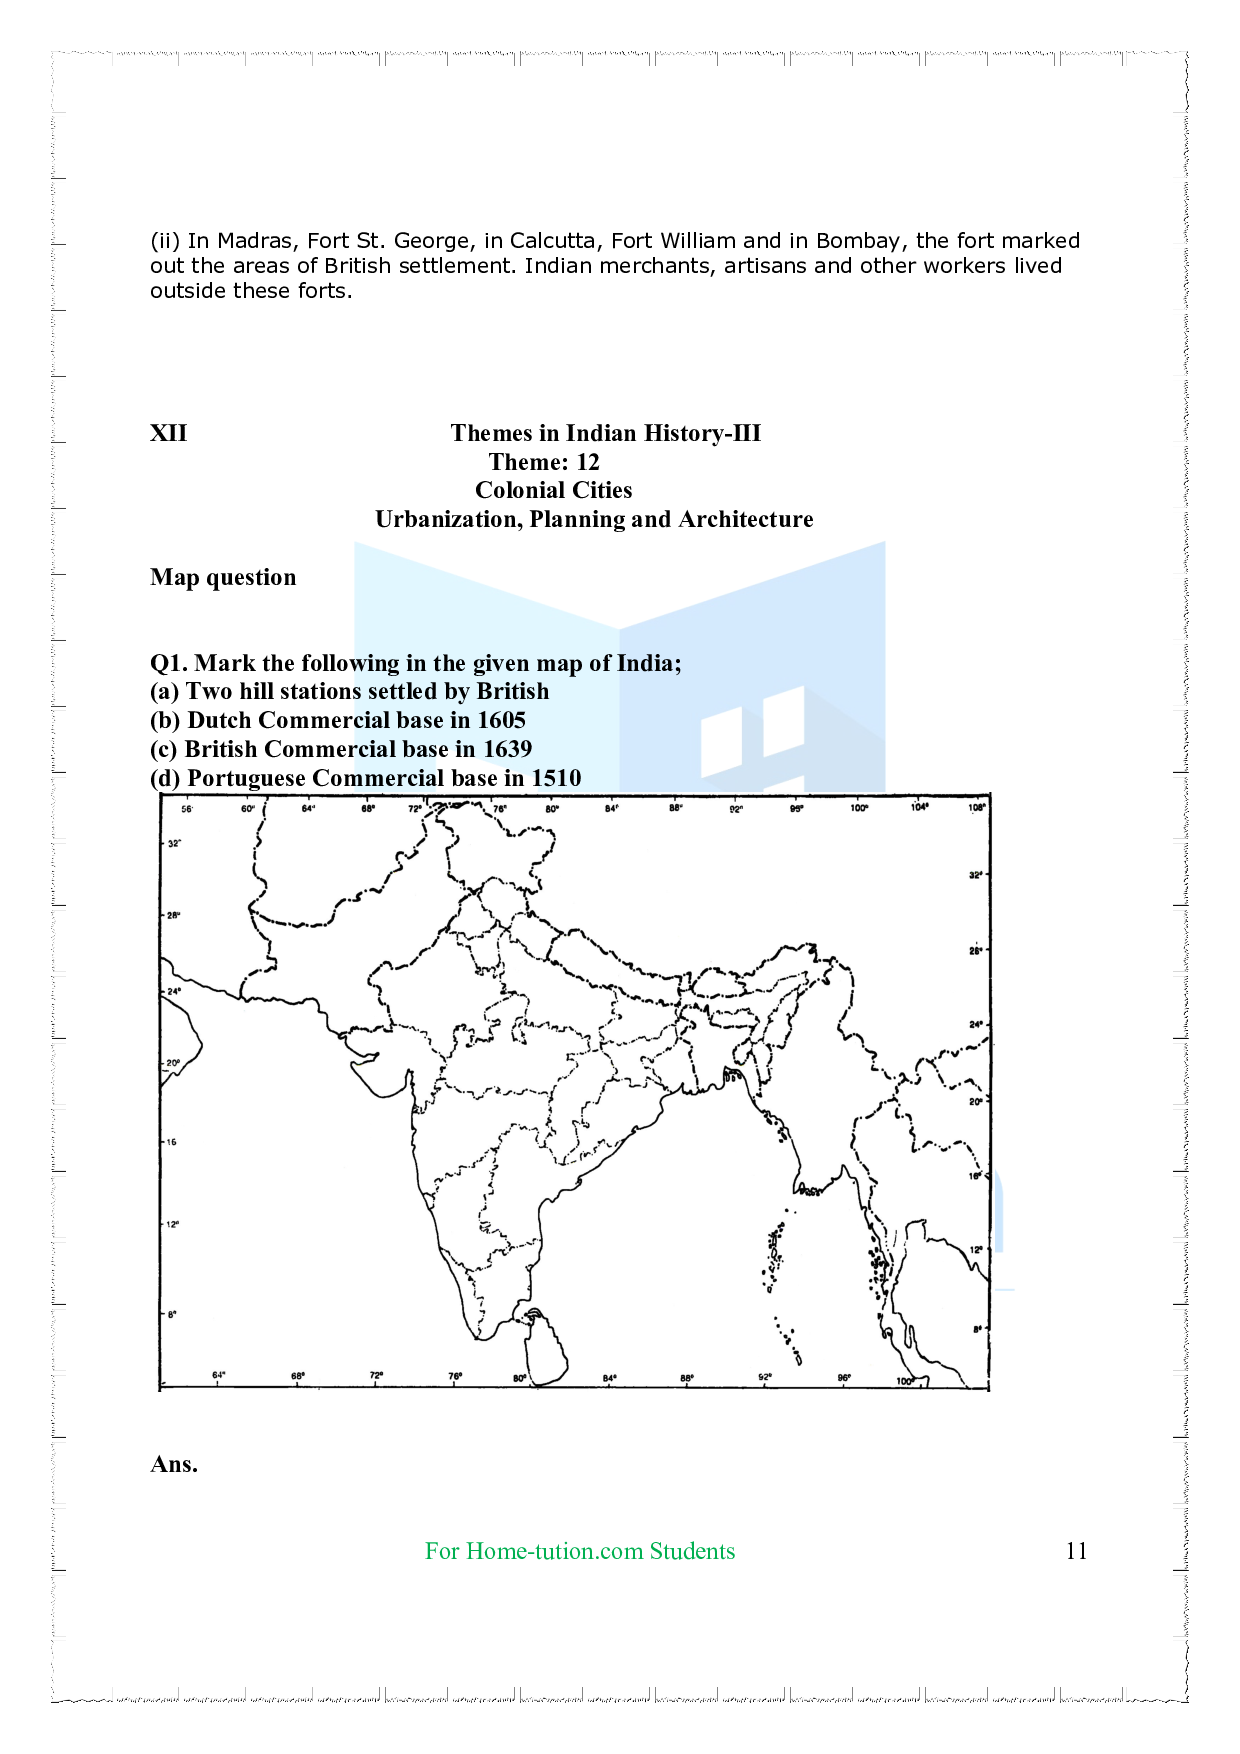 CBSE Questions for Chapter-12 Colonial Cities Urbanisation, Planning and Architecture